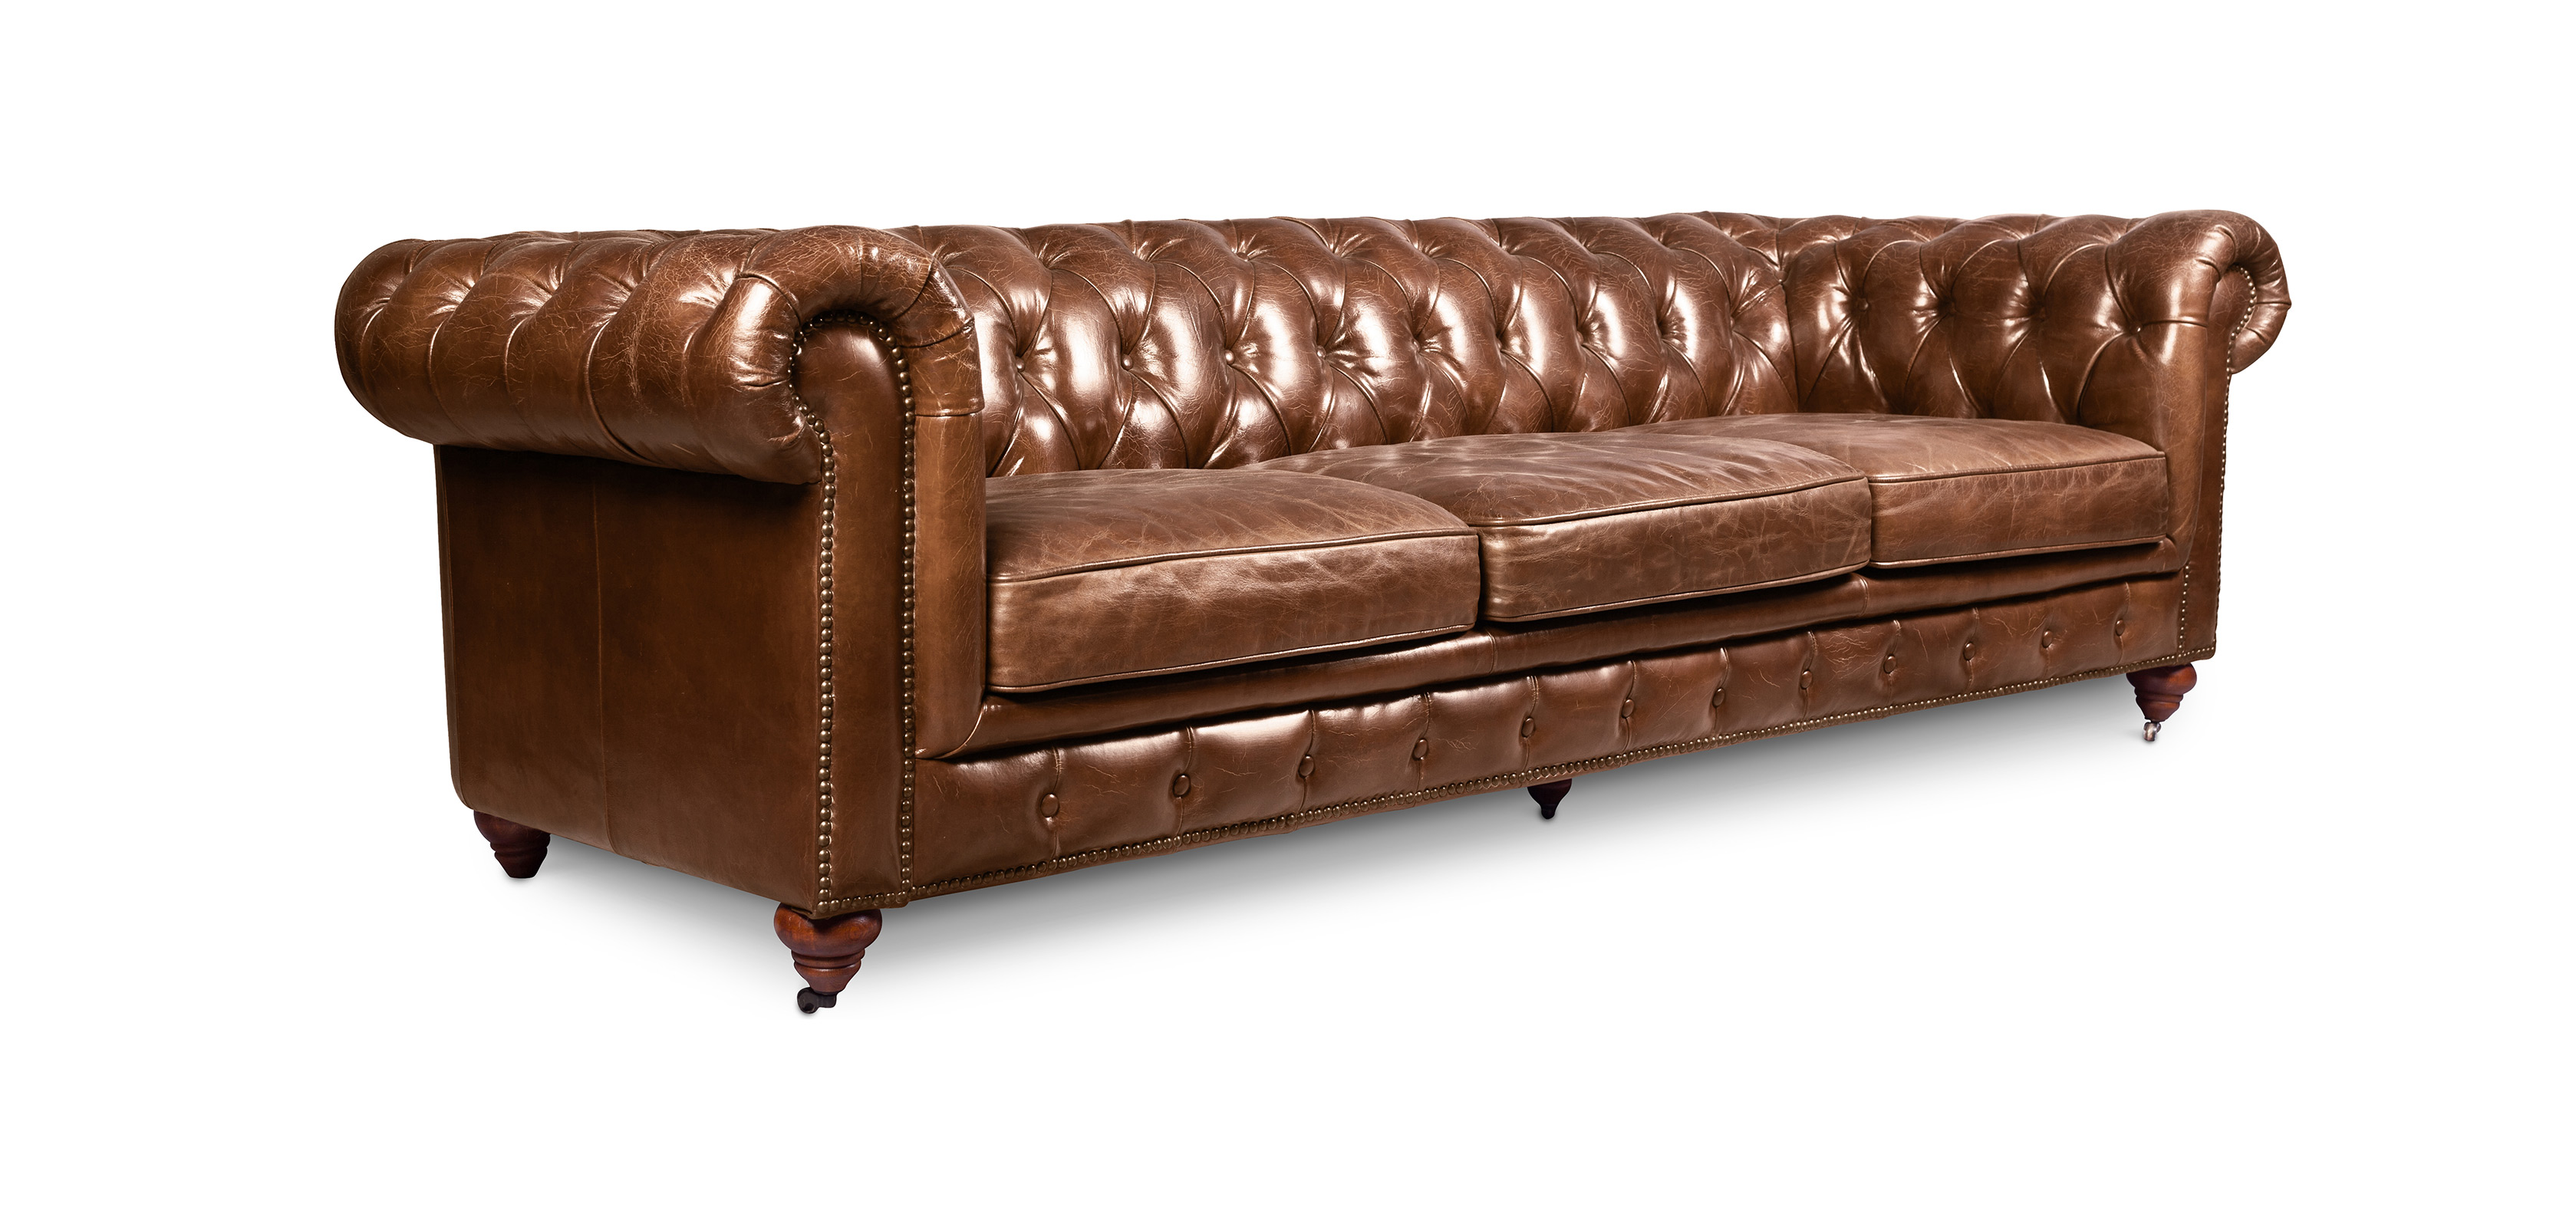 black leather chesterfield sofa uk